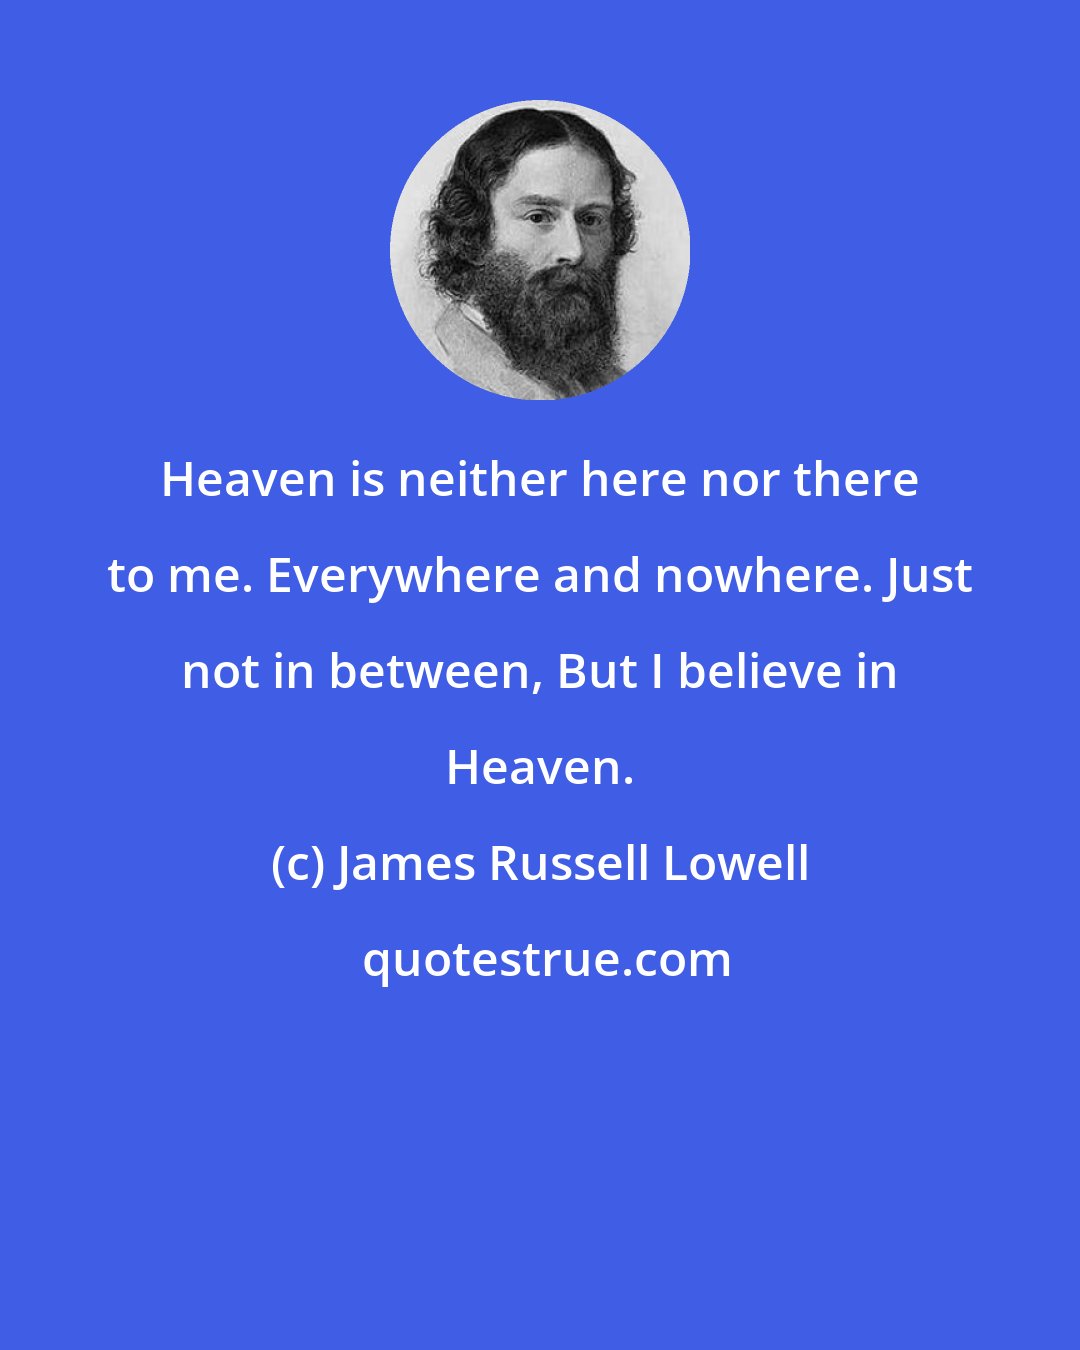 James Russell Lowell: Heaven is neither here nor there to me. Everywhere and nowhere. Just not in between, But I believe in Heaven.